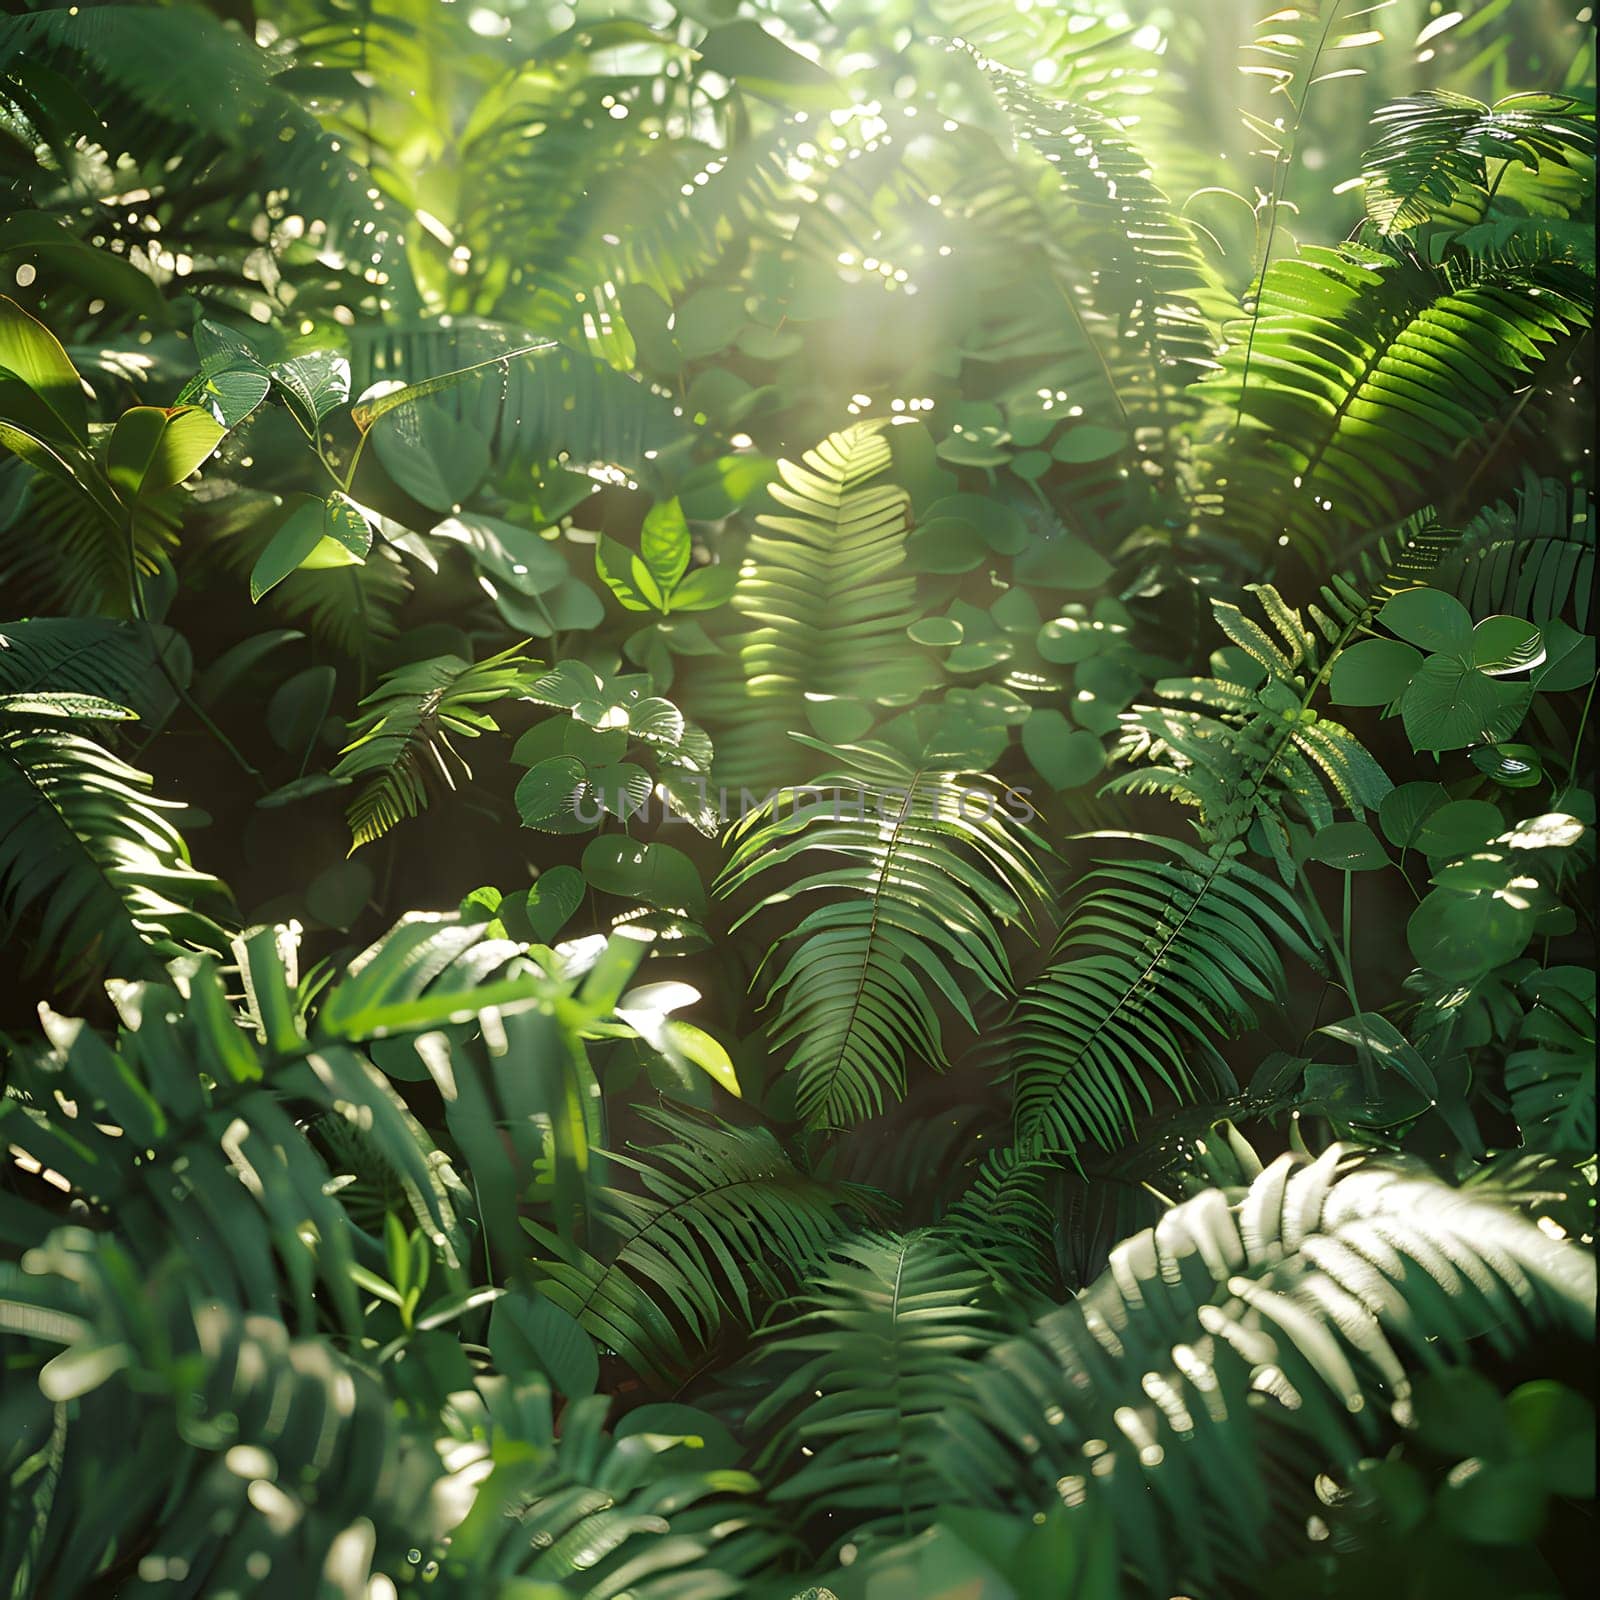 Sunlight filters through ferns in the jungle, illuminating the lush plant life by Nadtochiy